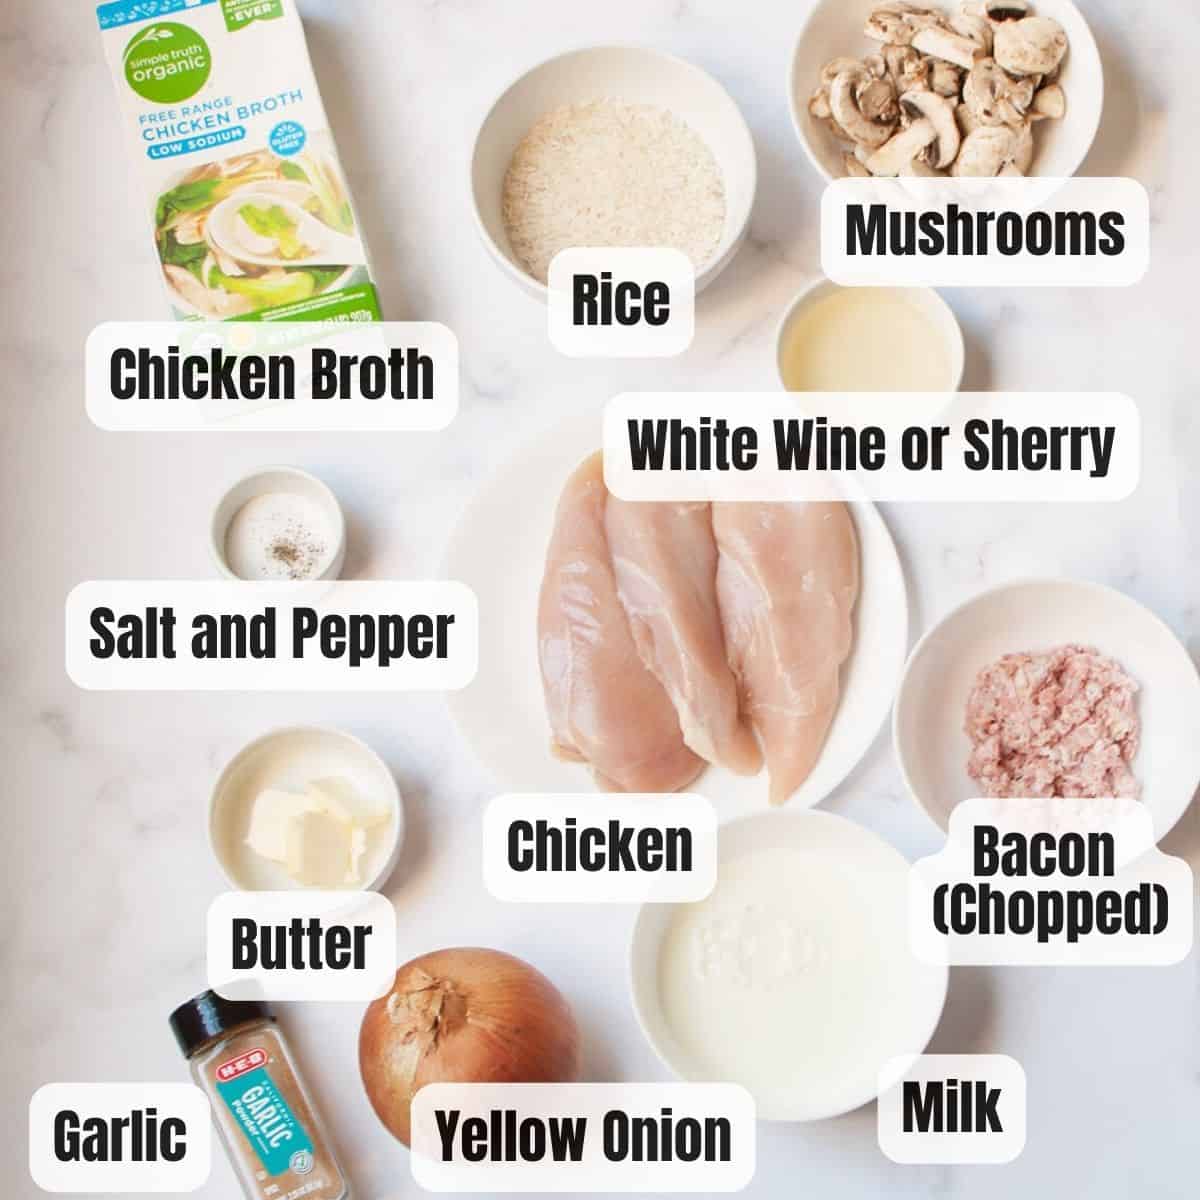 The ingredients needed to make cast iron skillet chicken and rice.